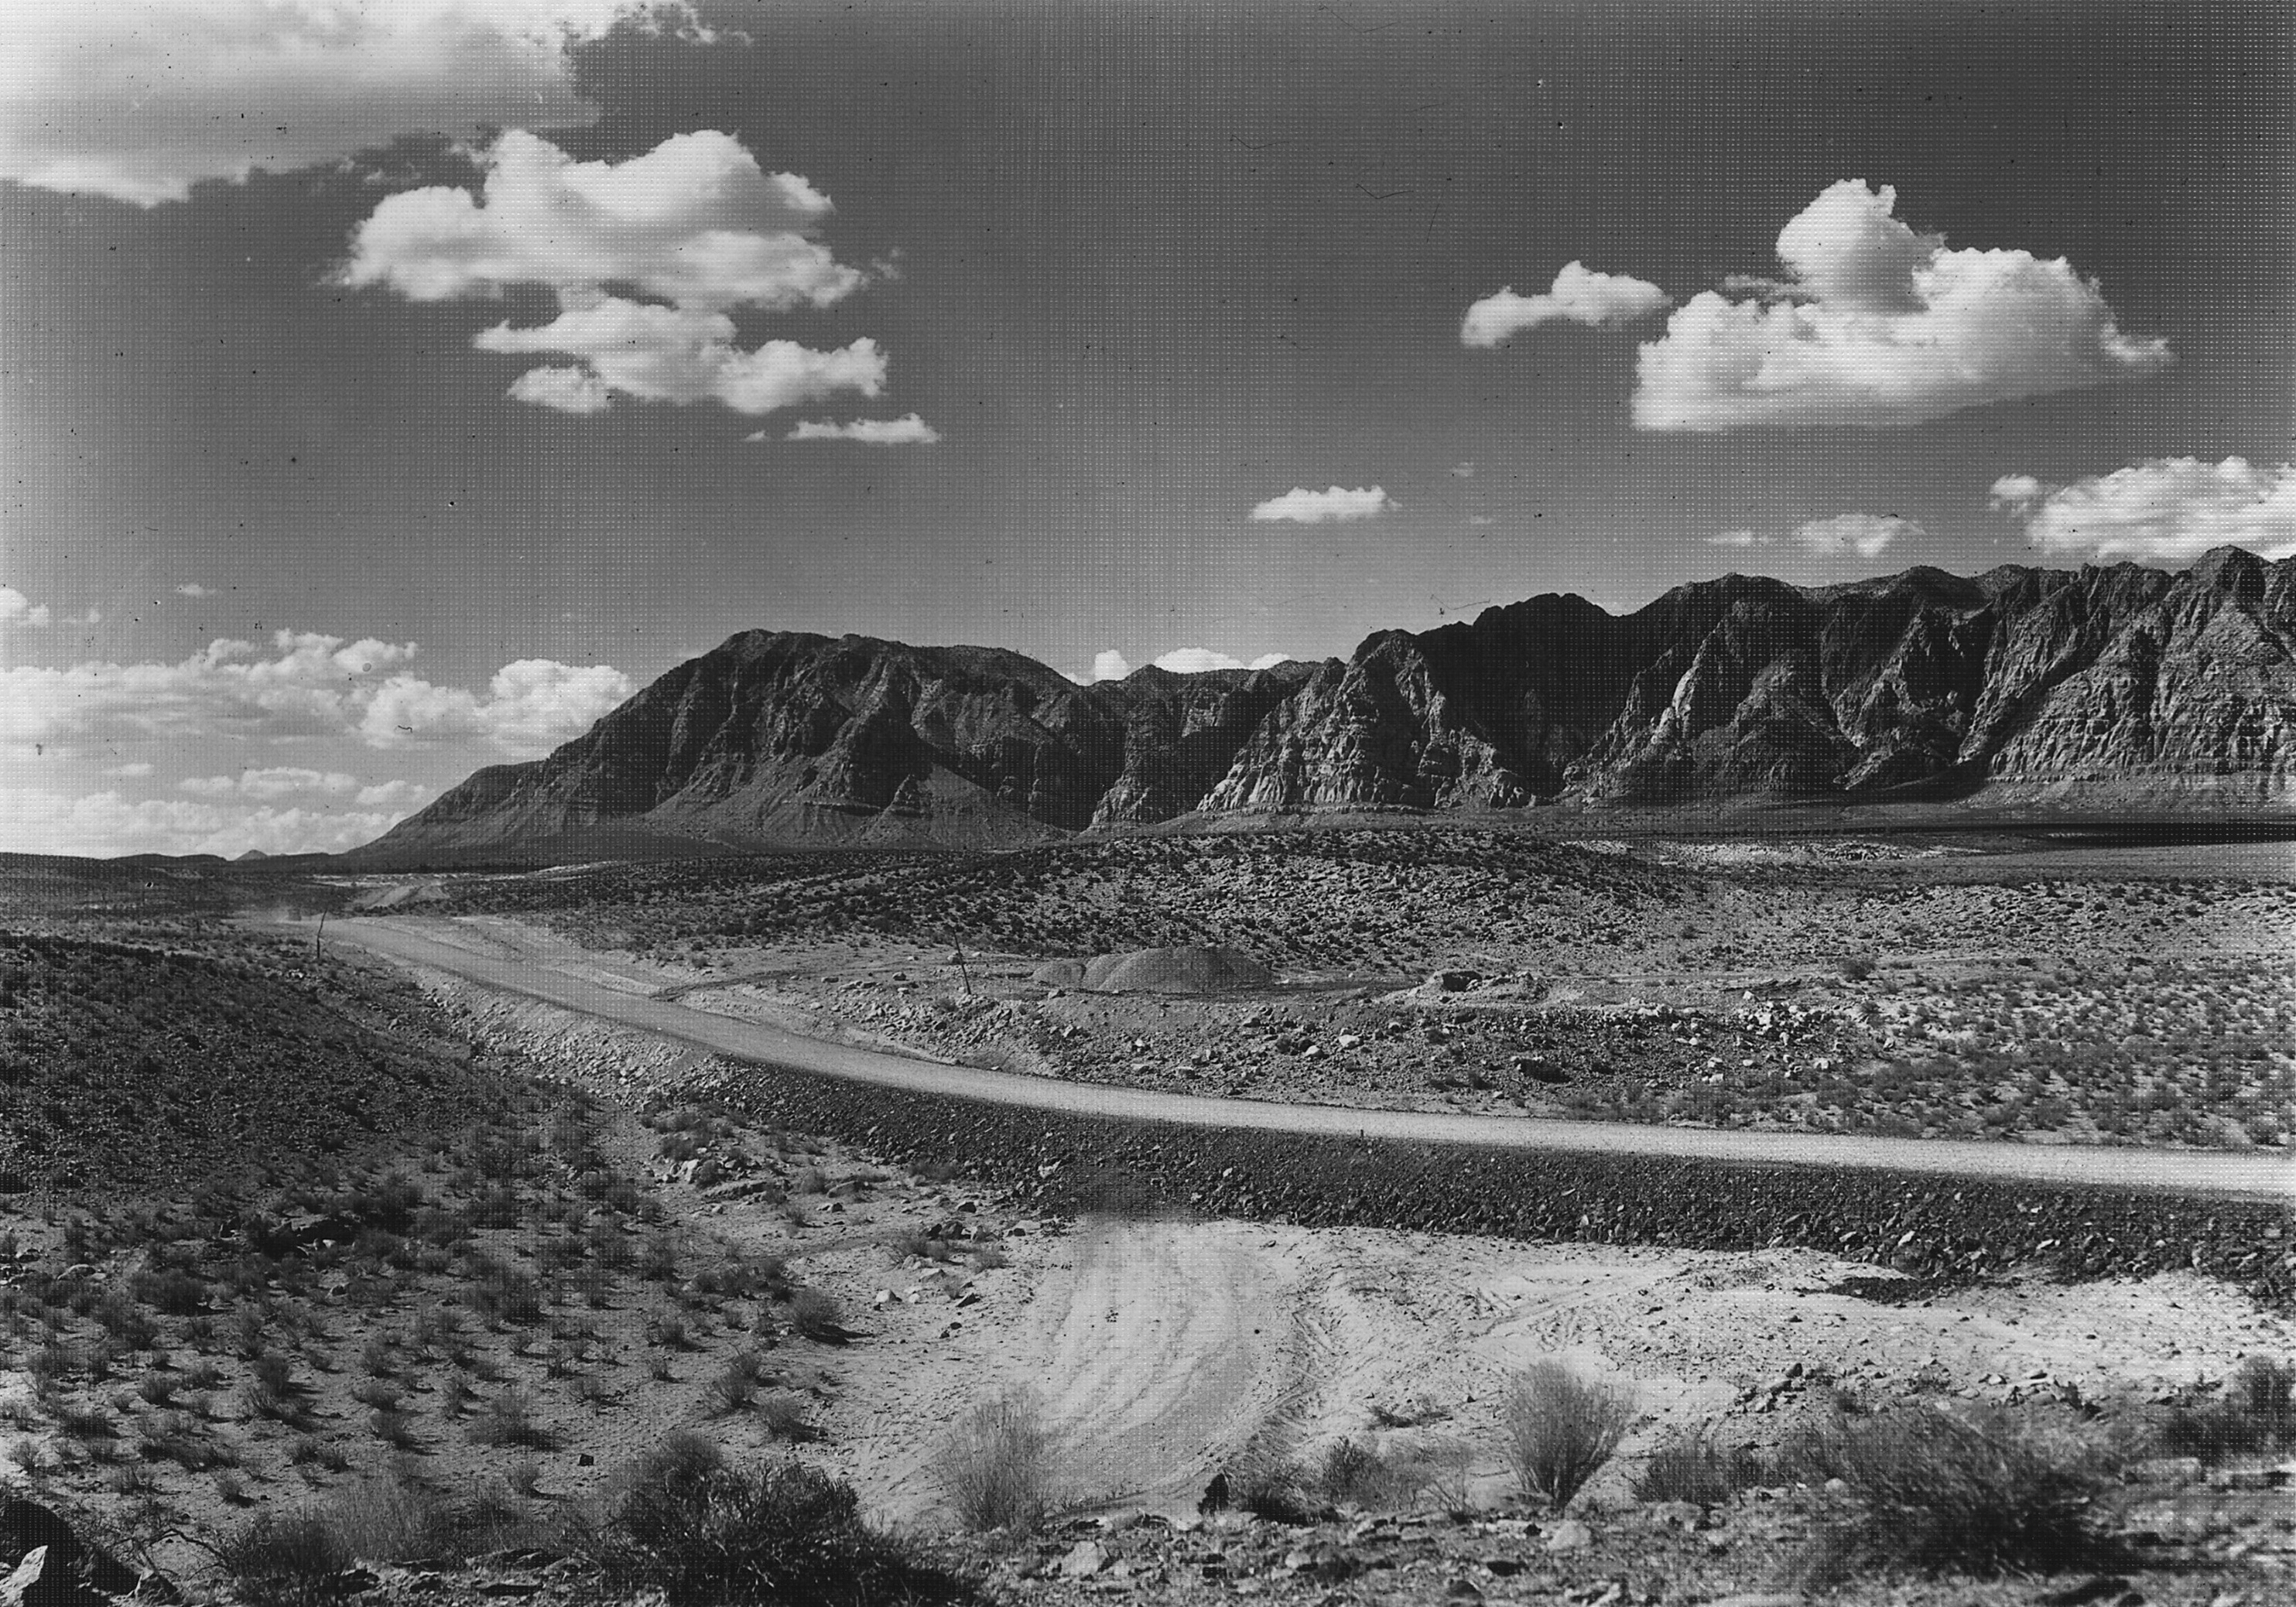 Highway 91 about 5 miles west of Santa Clara in 1929